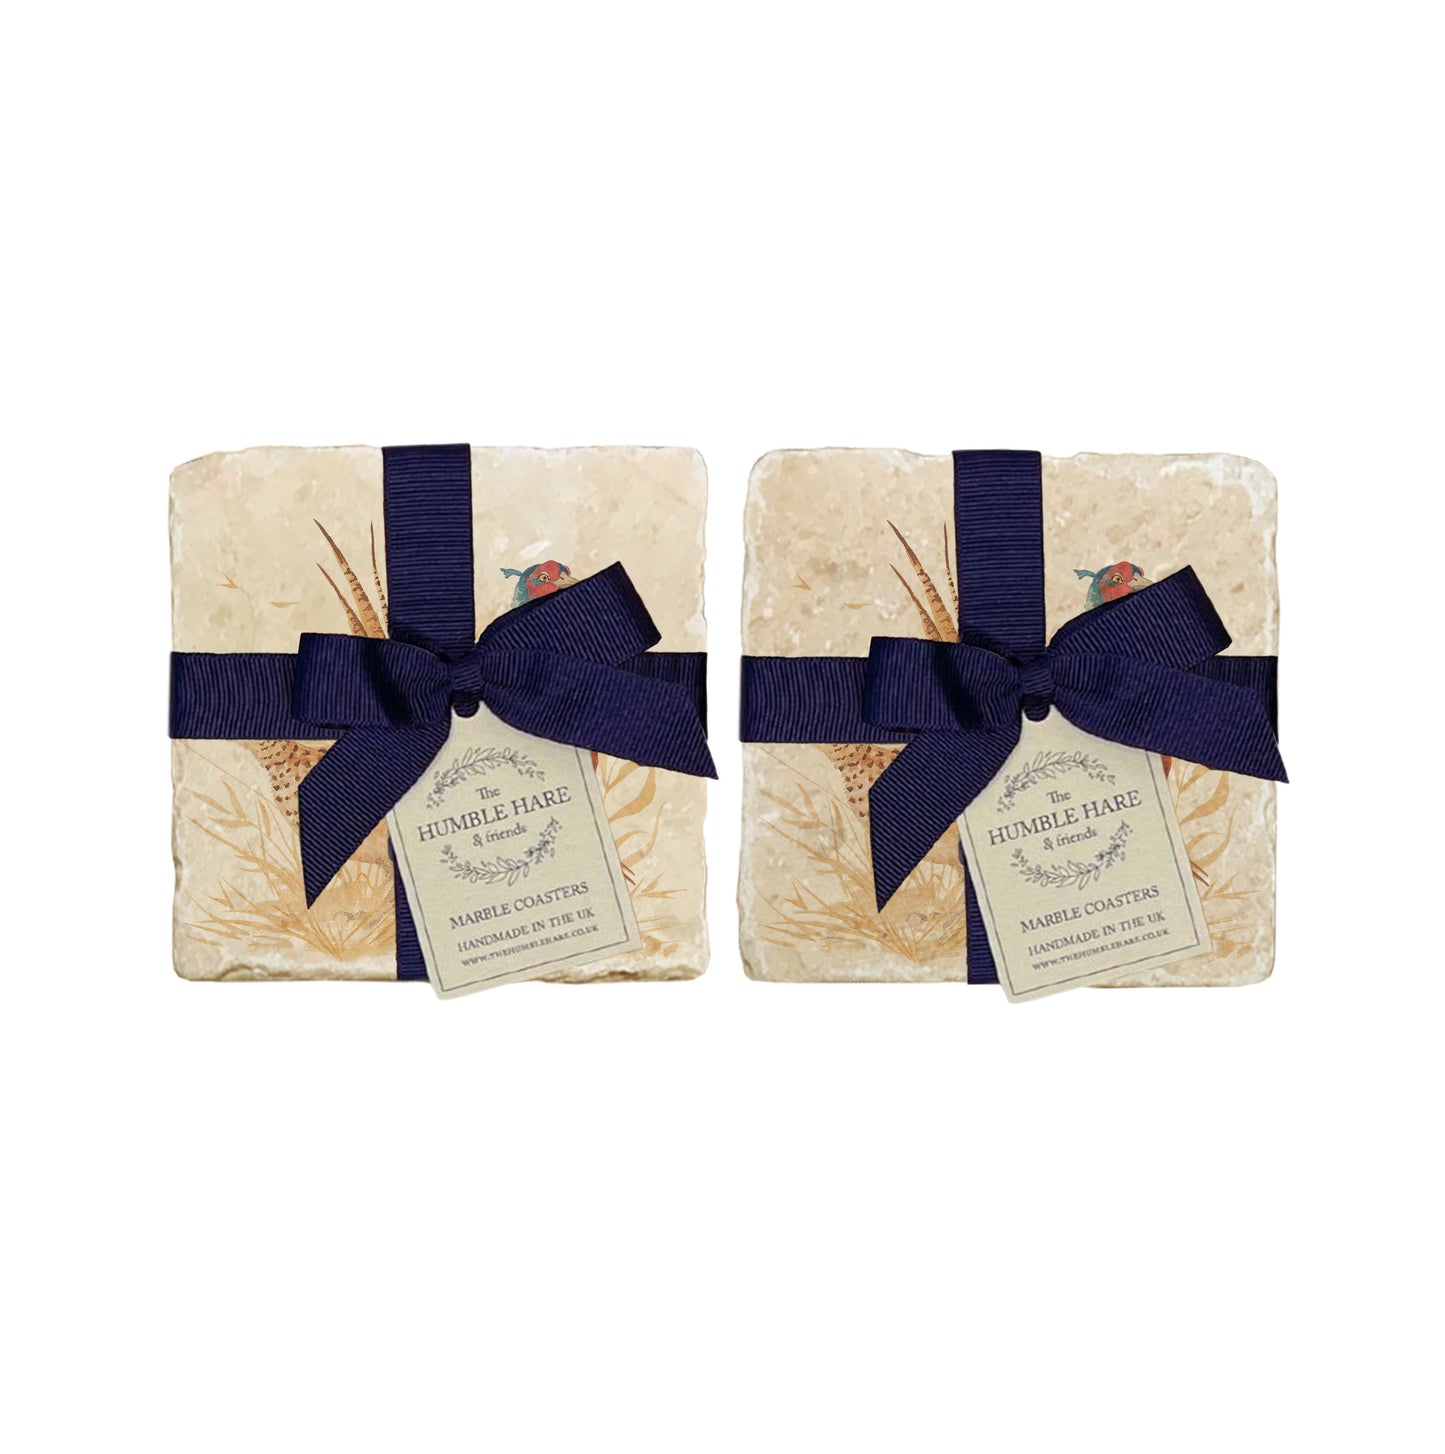 A set of 4 handmade marble coasters featuring a watercolour pheasant design, packaged in 2 pairs, with a luxurious blue bow and gift tag.